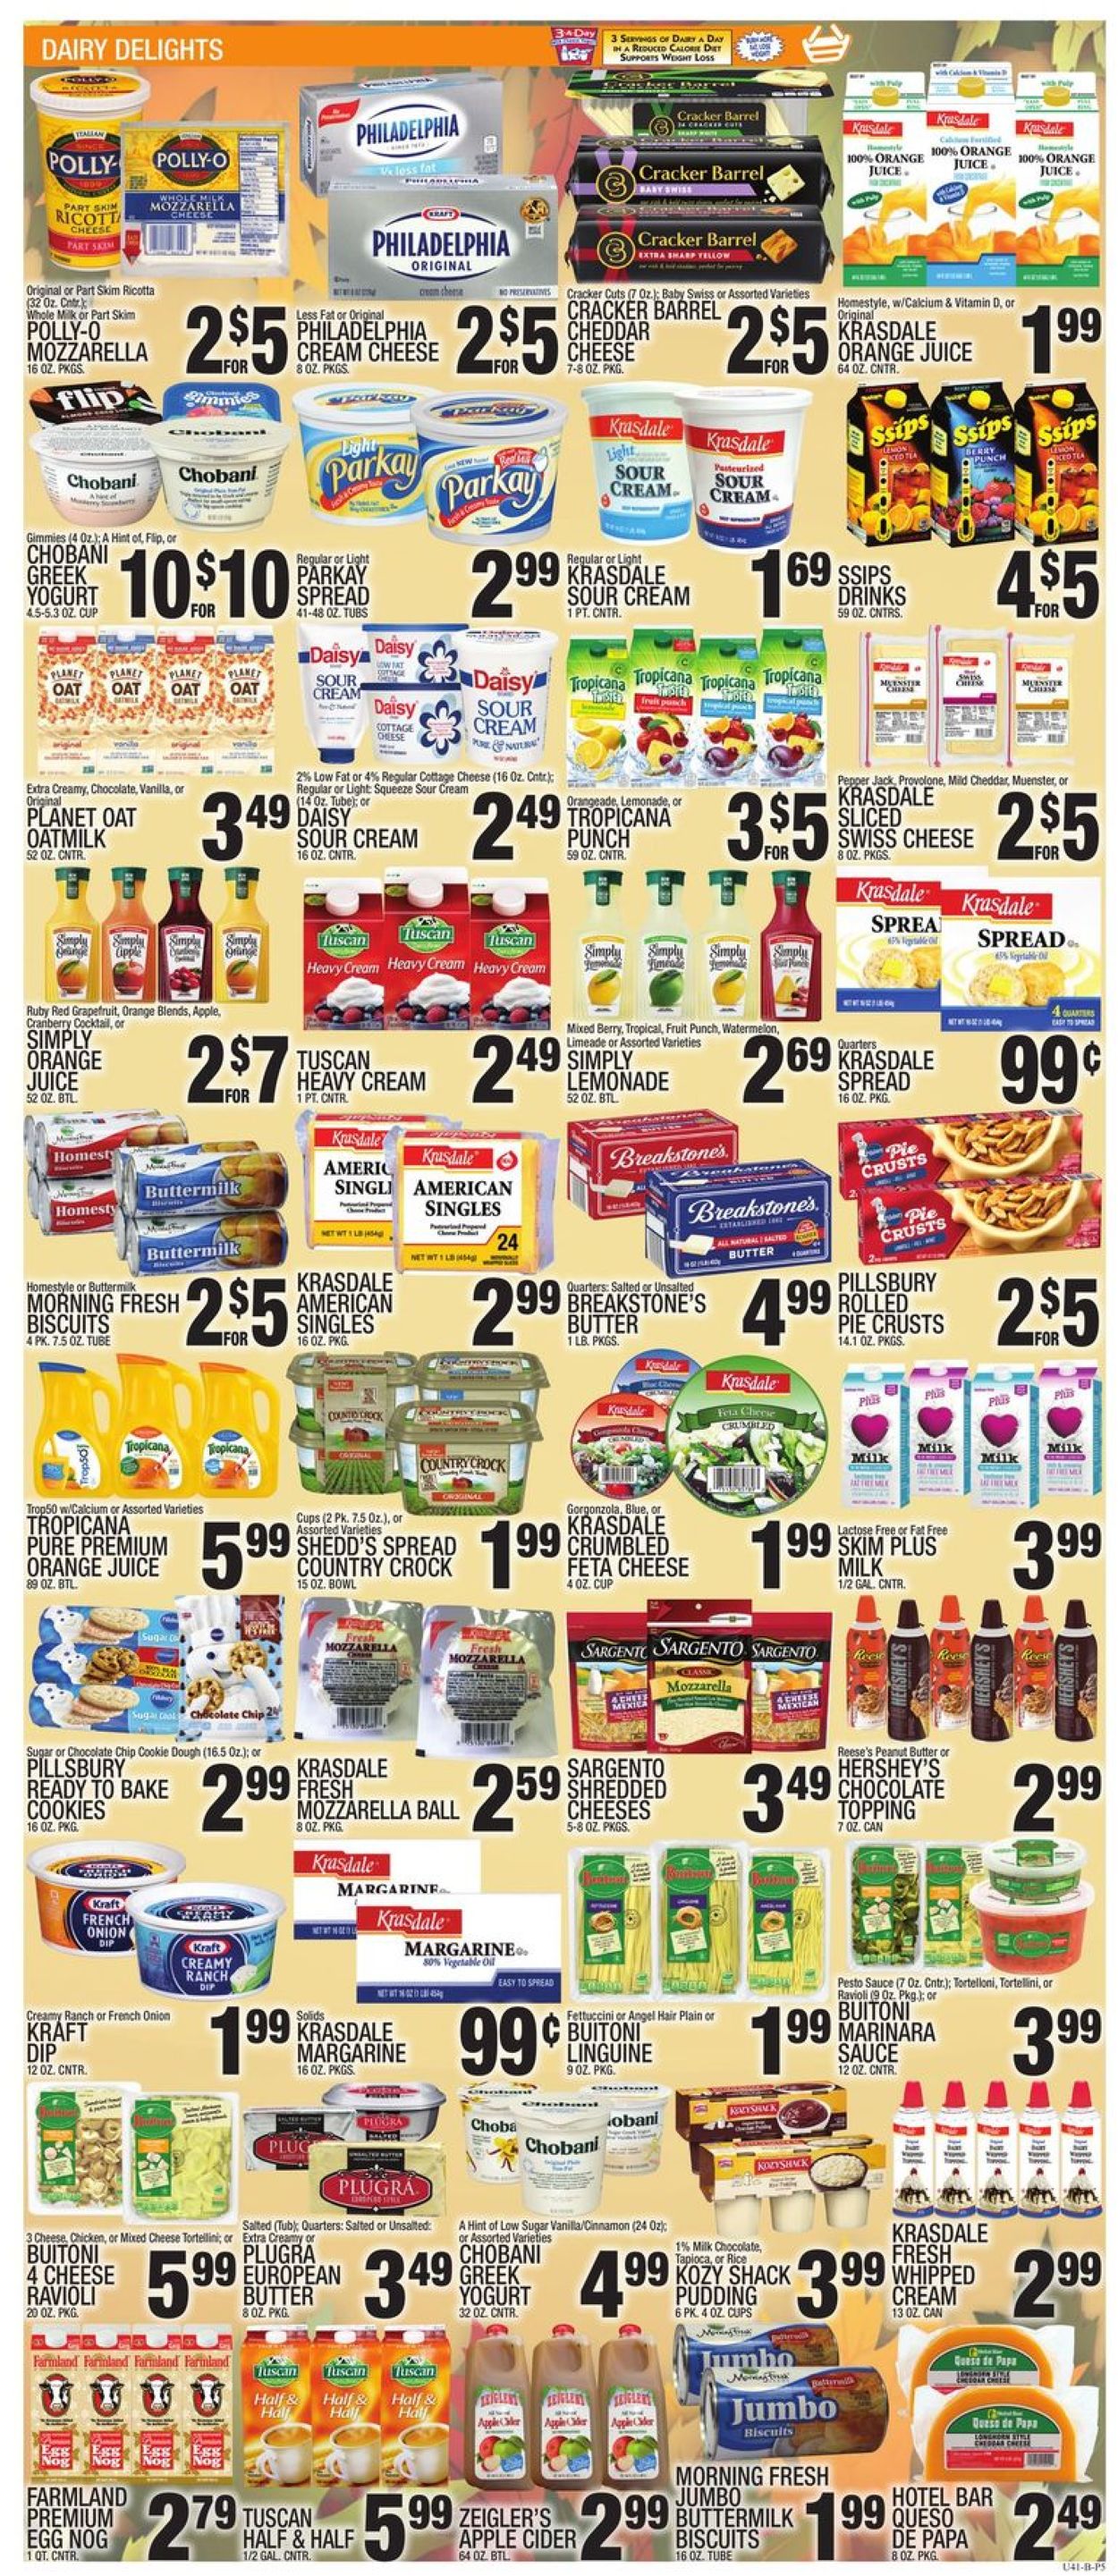 Catalogue C-Town - Thanksgiving Ad 2019 from 11/15/2019